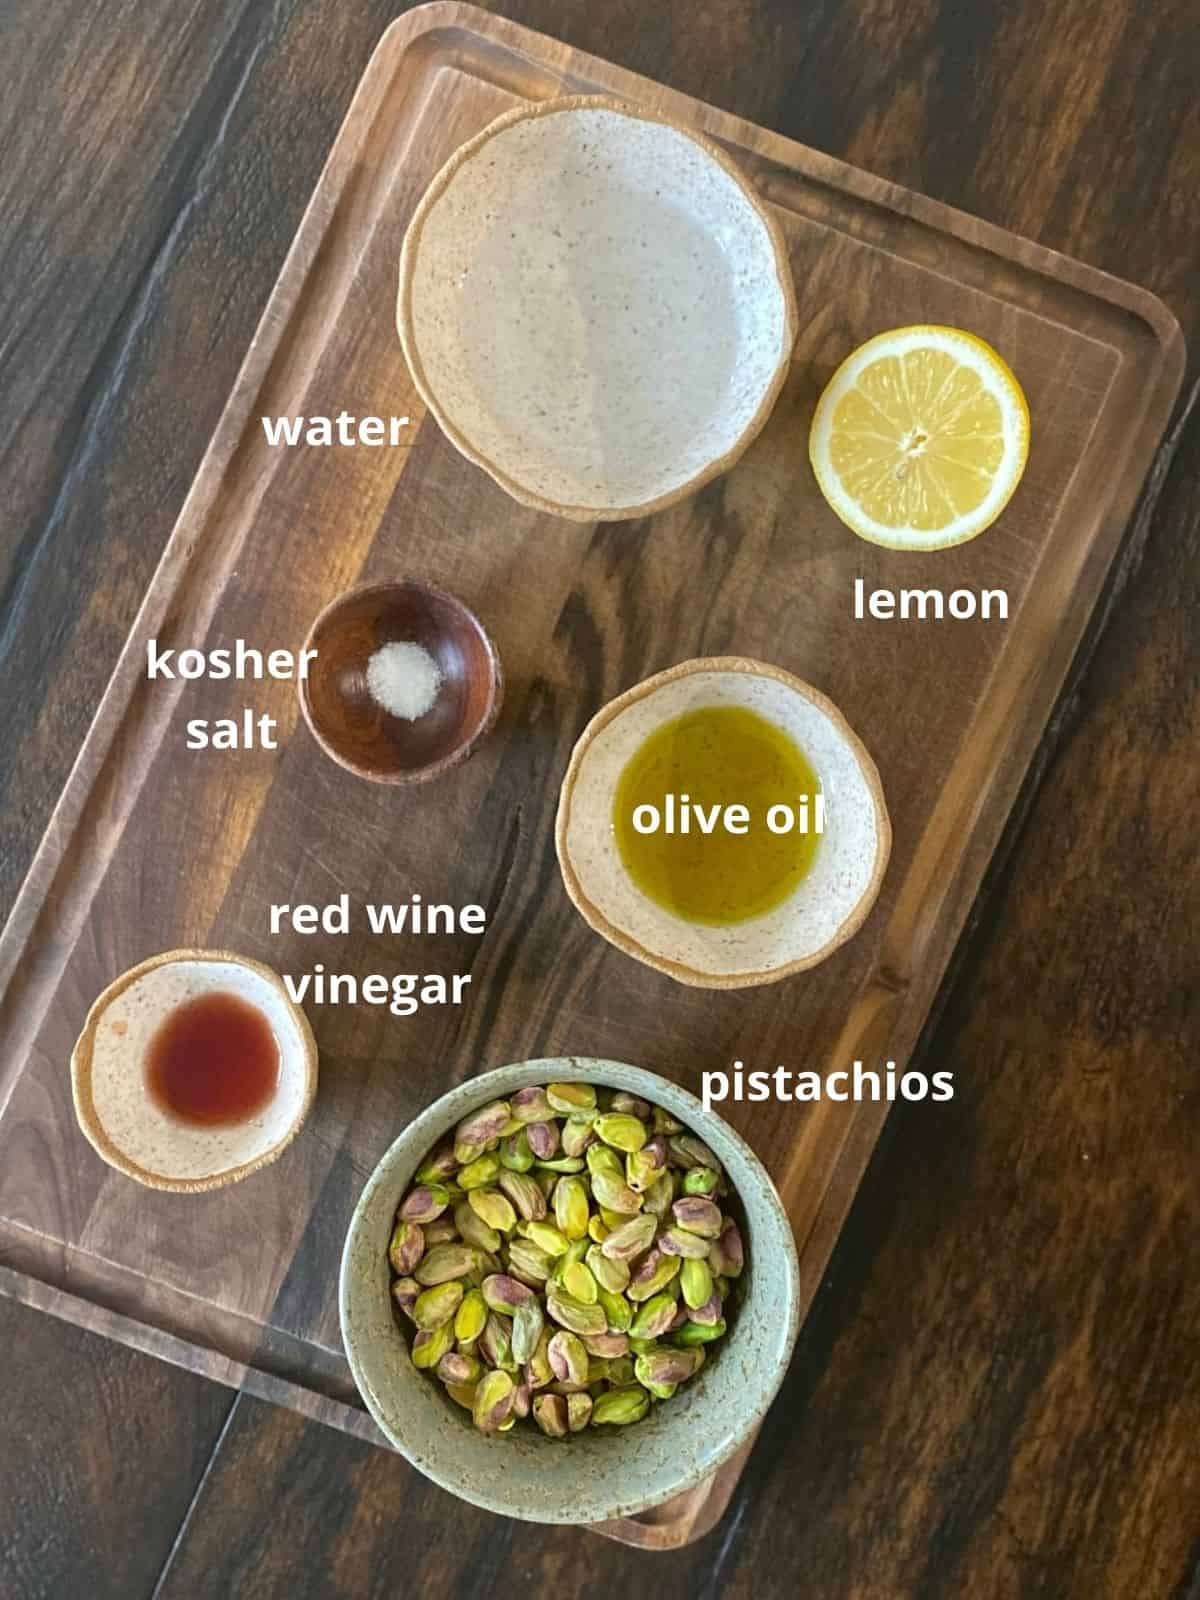 ingredients for pistachio butter on wood board